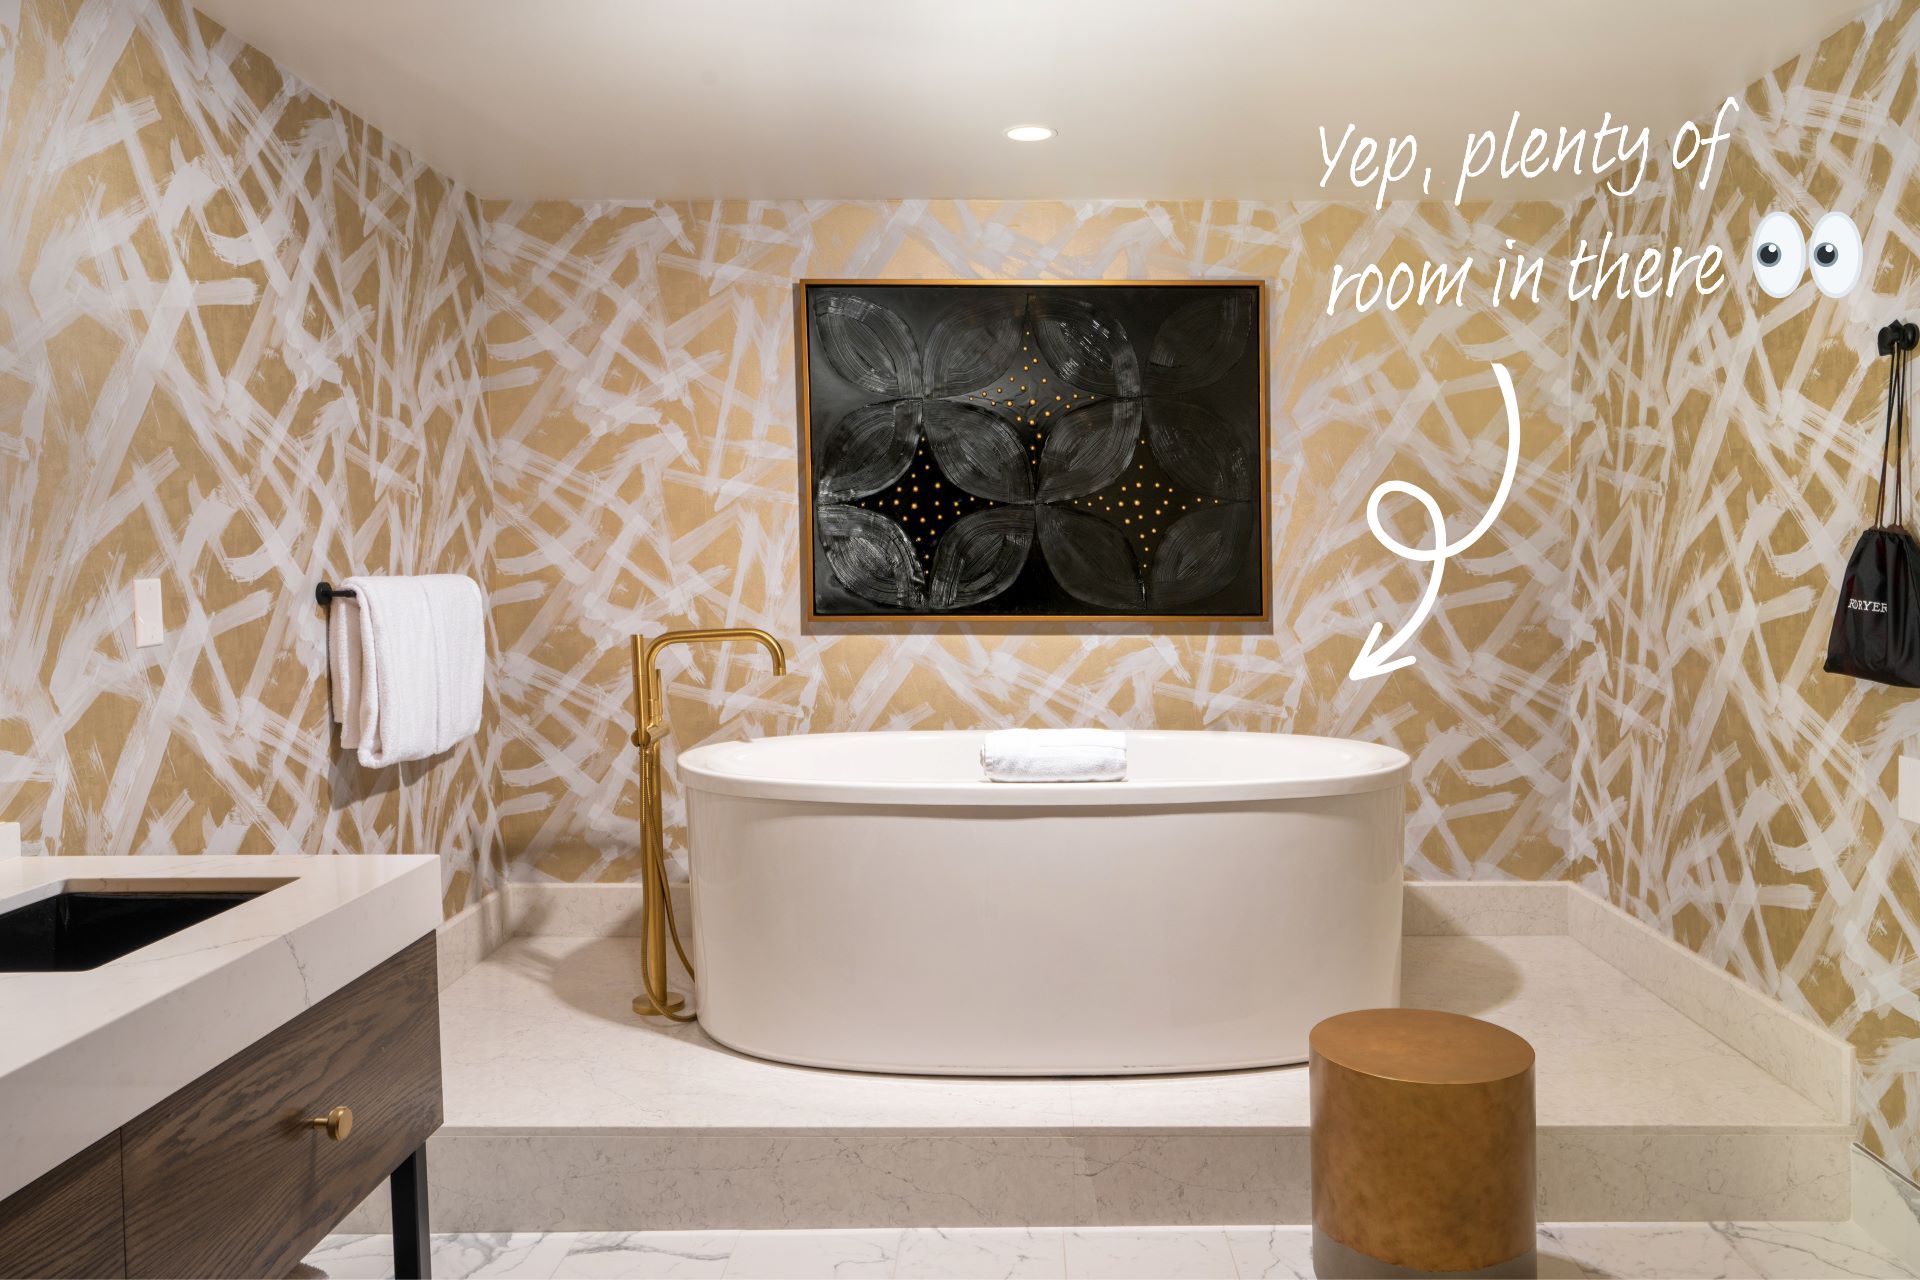 The bathroom in the Shag Suite at Virgin Hotels Las Vegas. A modern stand alone bath sits in the centre of the room, a large abstract painting above it, on a wall decorated with yellow patterned wallpaper.